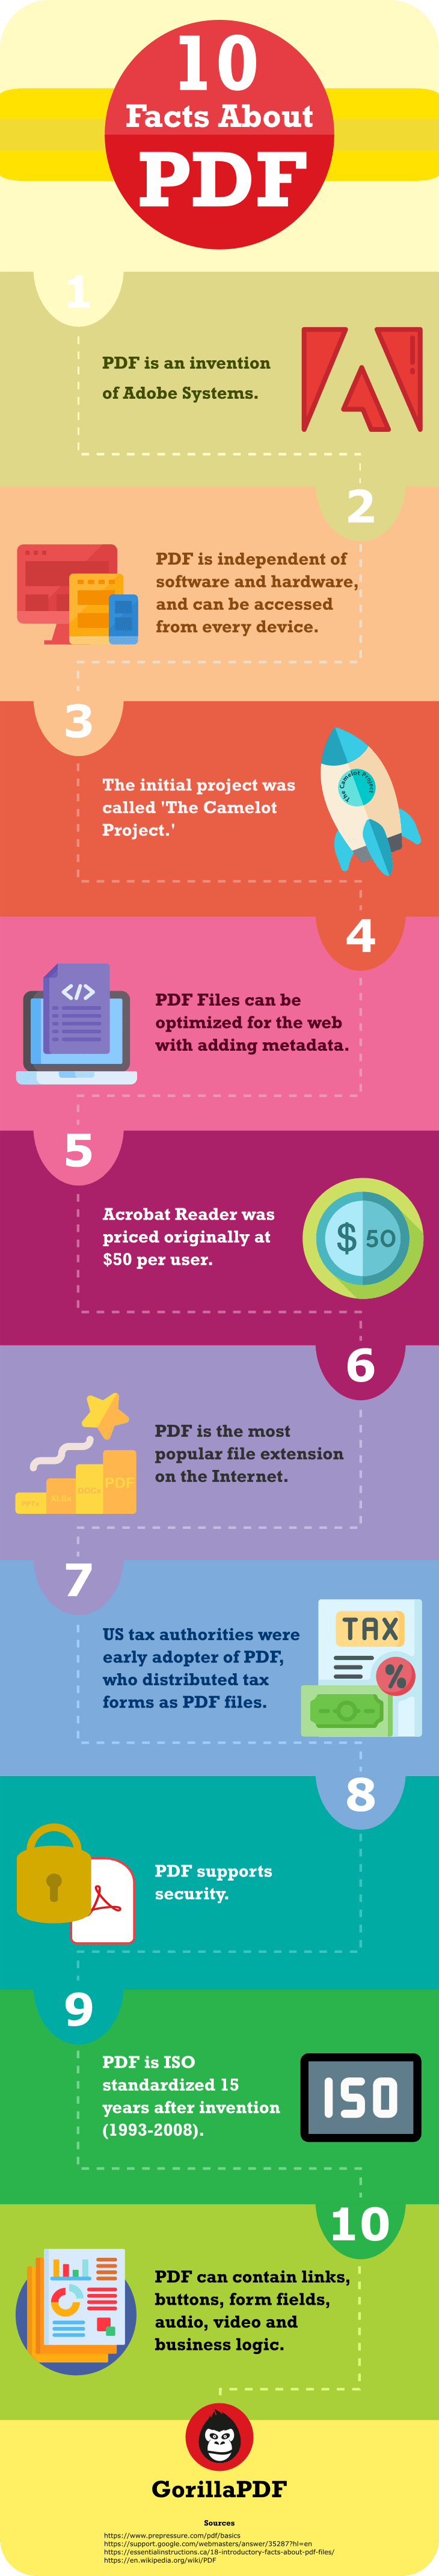 Infographic - 10 facts about PDF